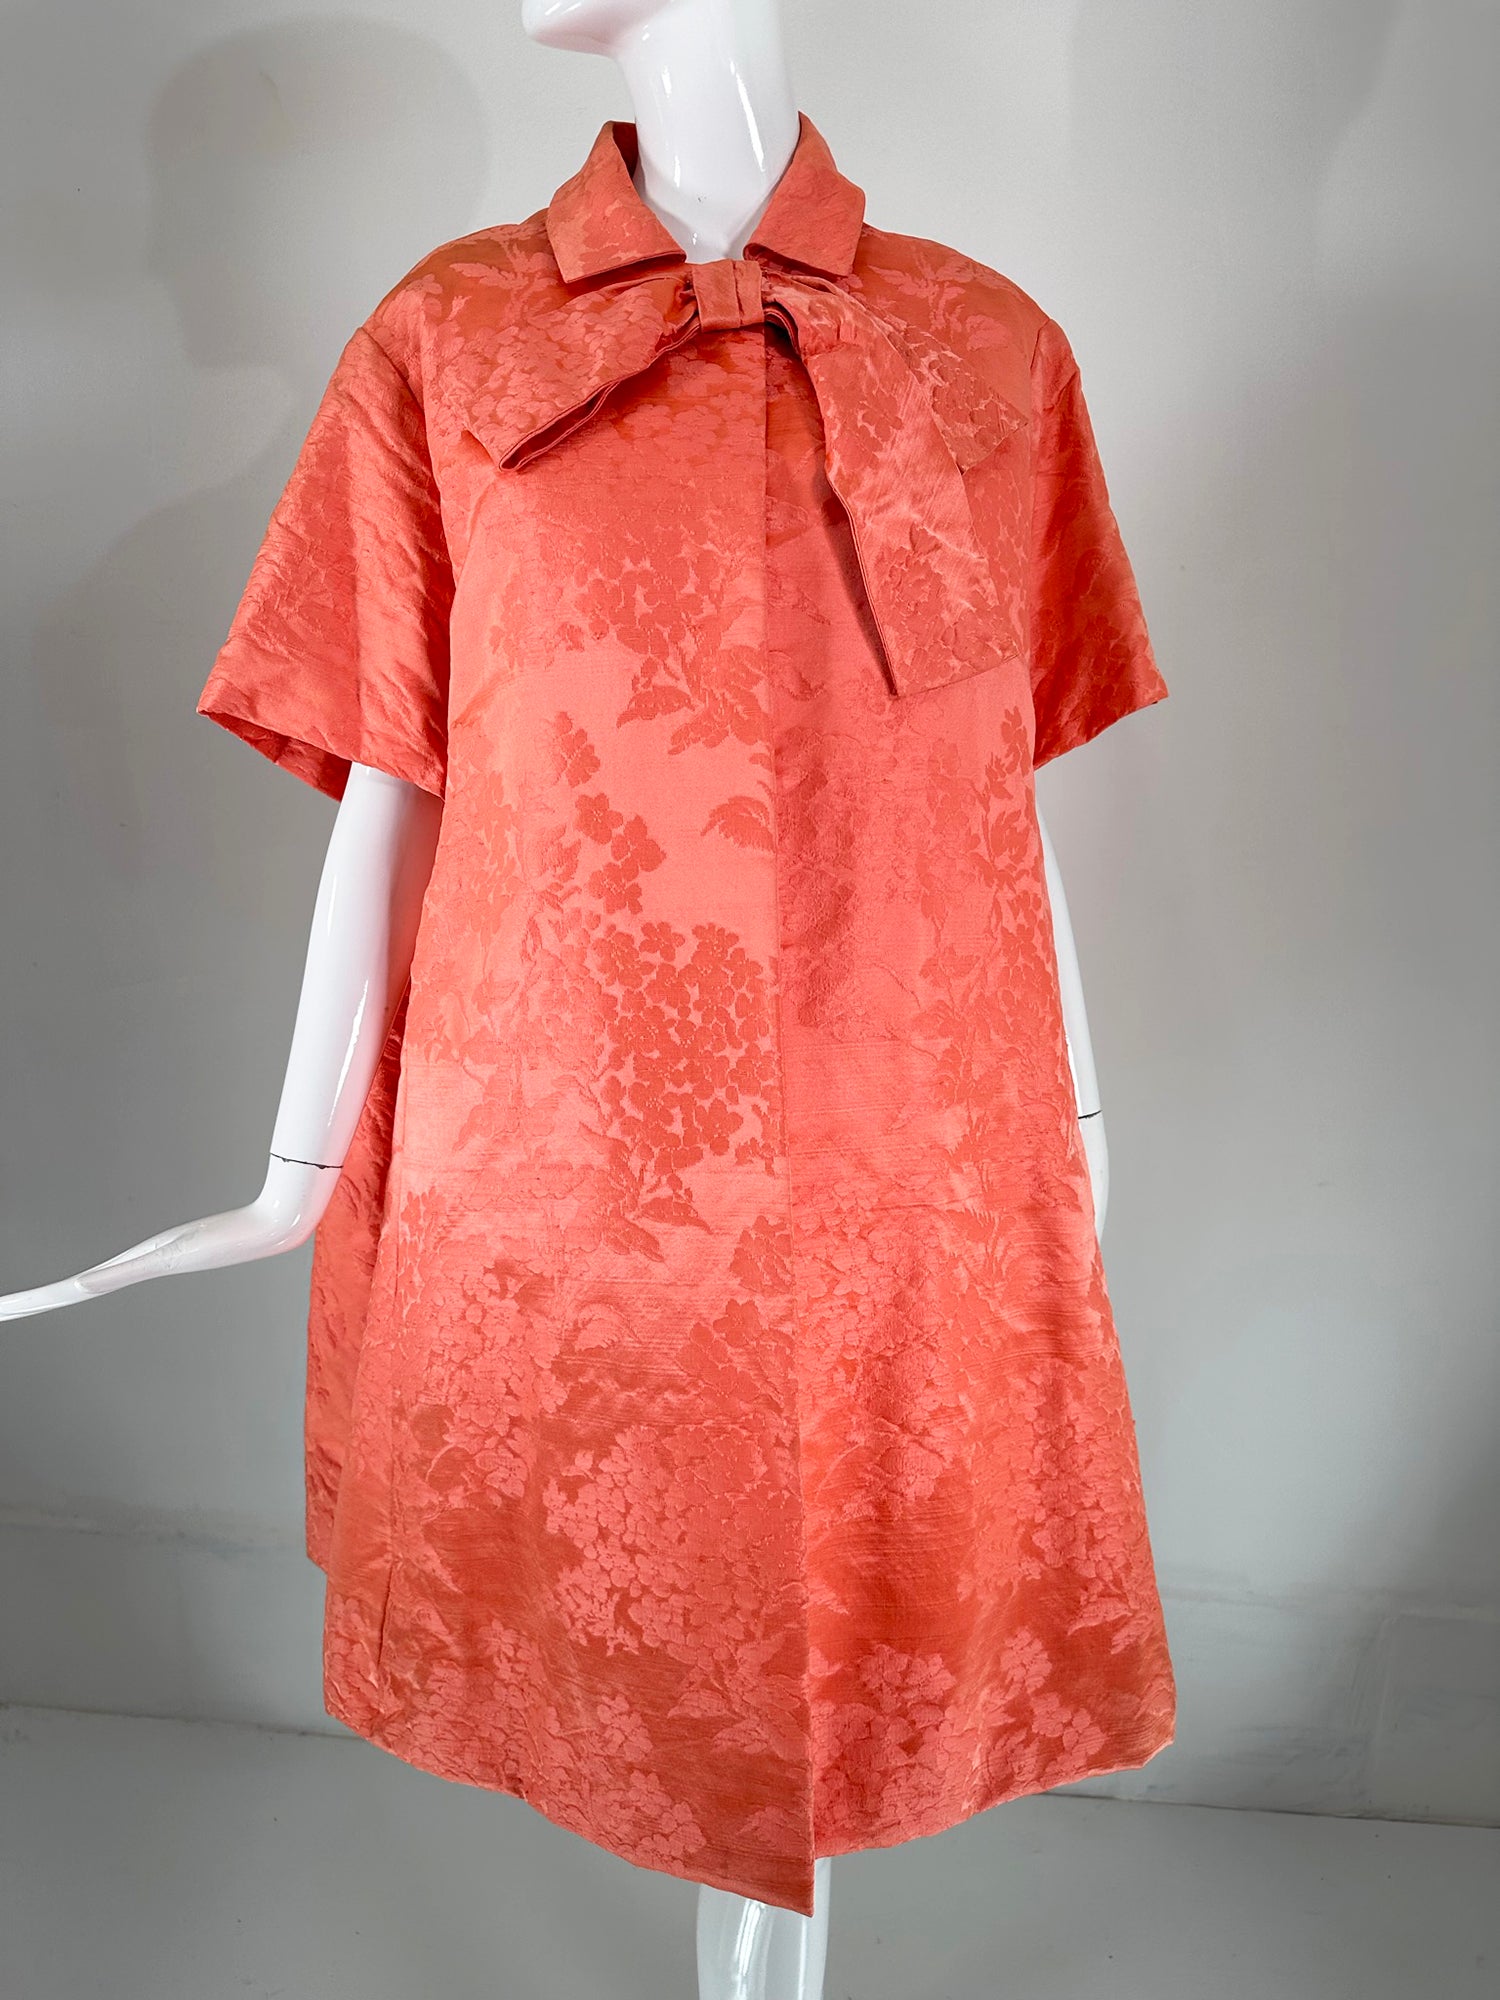 Lanvin-Castello Haute Couture dress & coat ensemble in bright coral silk brocade from the 1950s. Lanvin is the oldest French fashion house founded by Jeanne Lanvin in Paris in 1889 upon finishing her apprenticeship in millinery. 
She created a